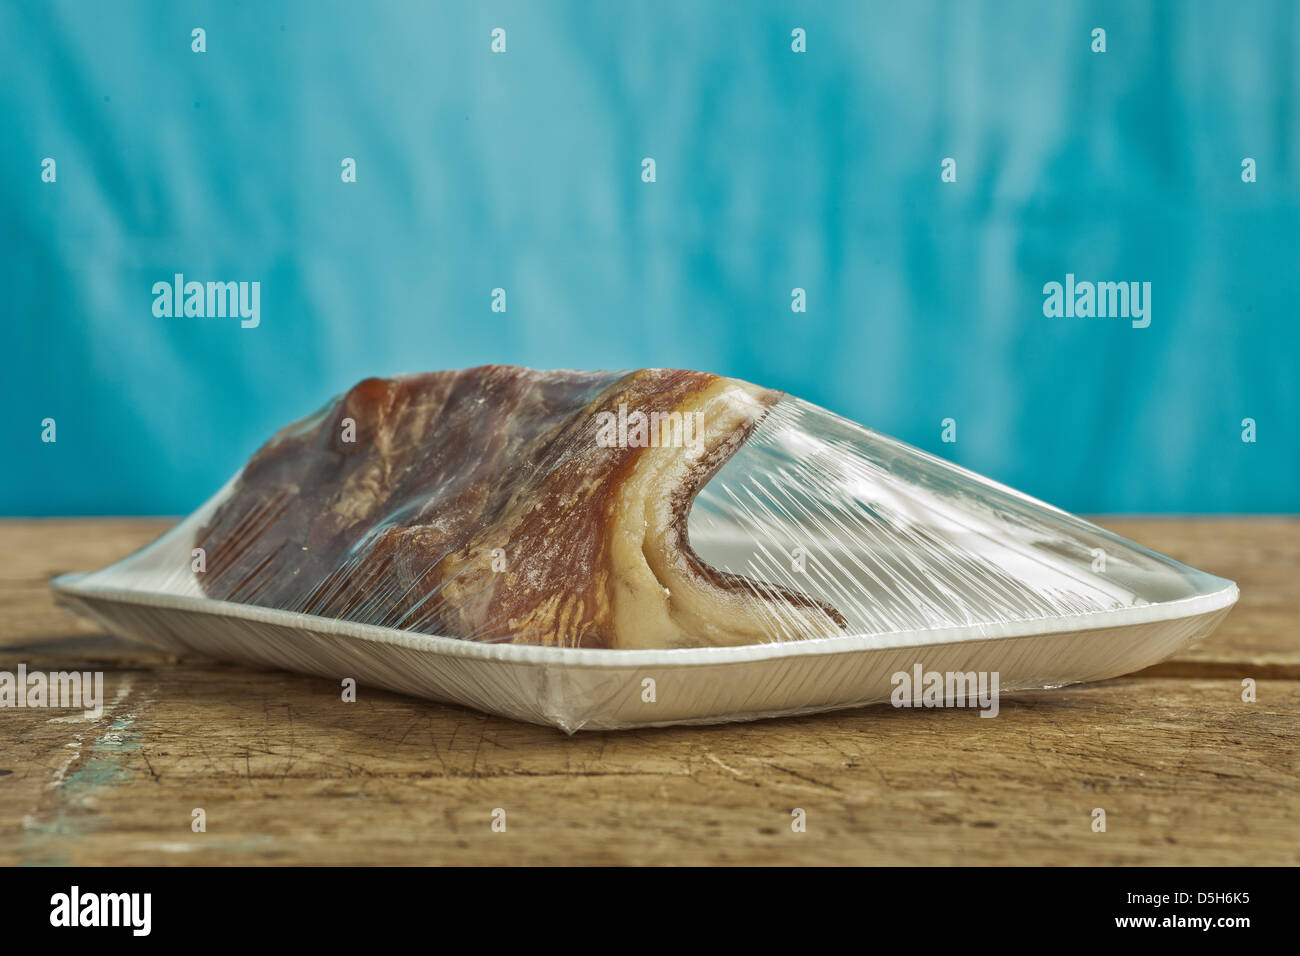 uncut bacon wrapped in plastic Stock Photo